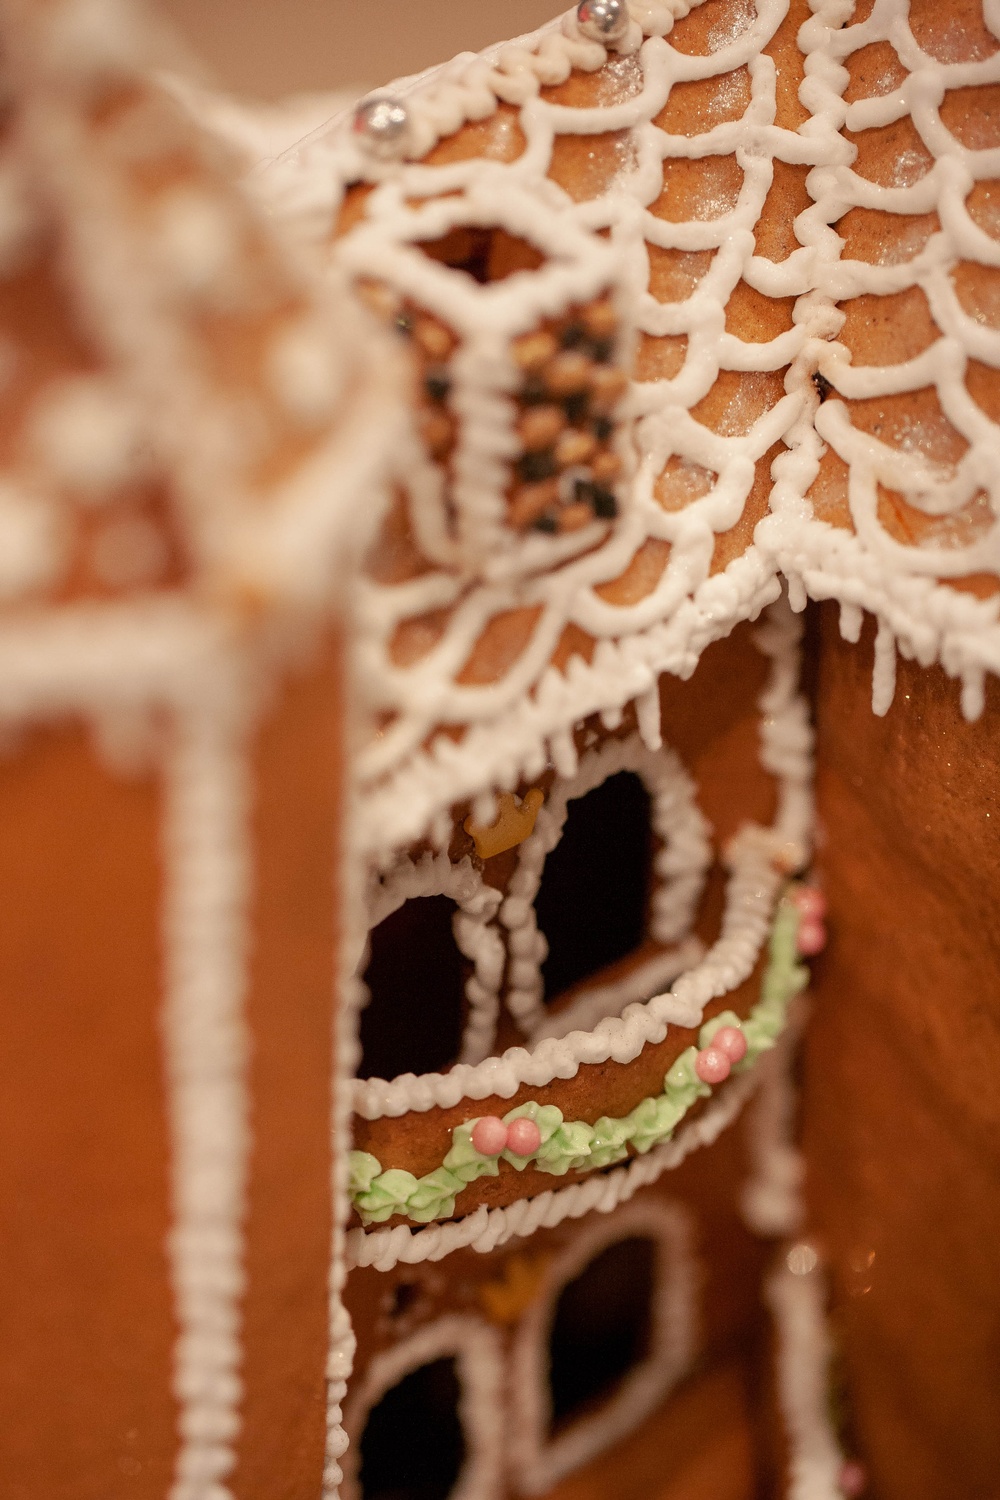 Details from the Gingerbread House Competition 2018. Cred: Viktoria Garvare.